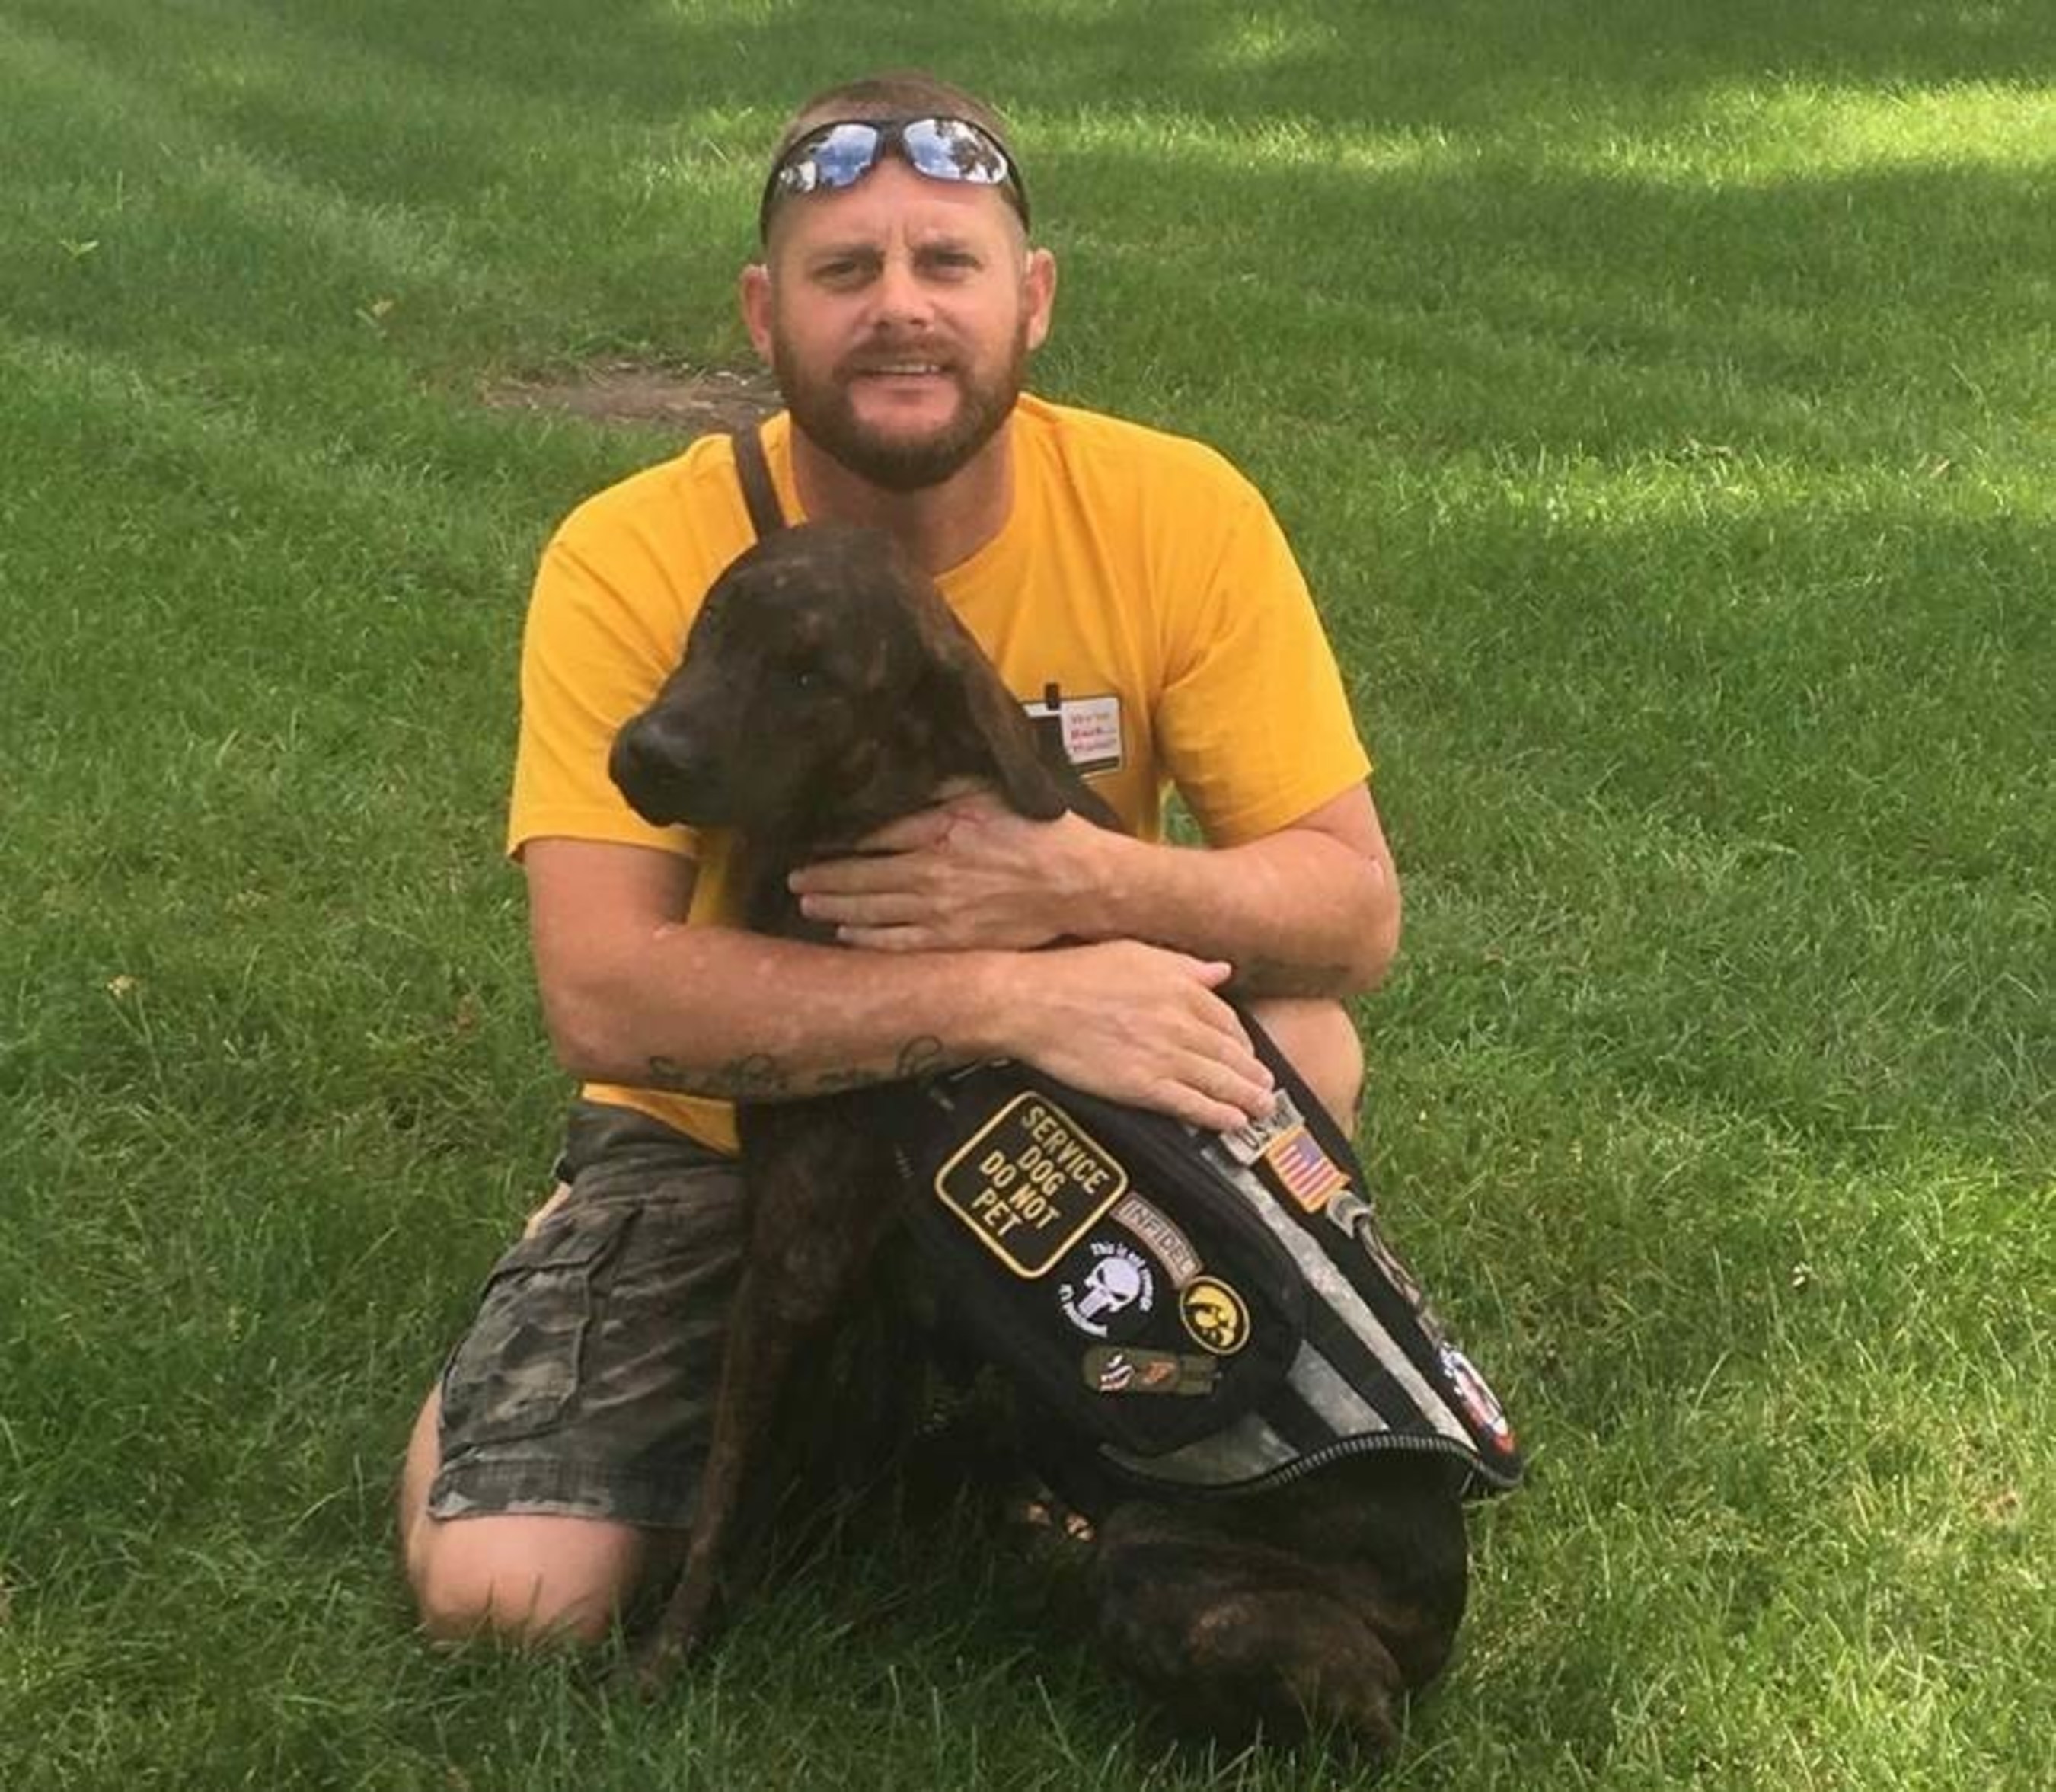 An Army veteran and former Navy rescue swimmer, who has overcome PTSD and other combat-related injuries thanks to his service dog, was one of the recipients of a new Tempur-Pedic bed through the PGA TOUR's military outreach initiative, Birdies for the Brave. His furry buddy also received his very own Tempur-Pedic dog bed.